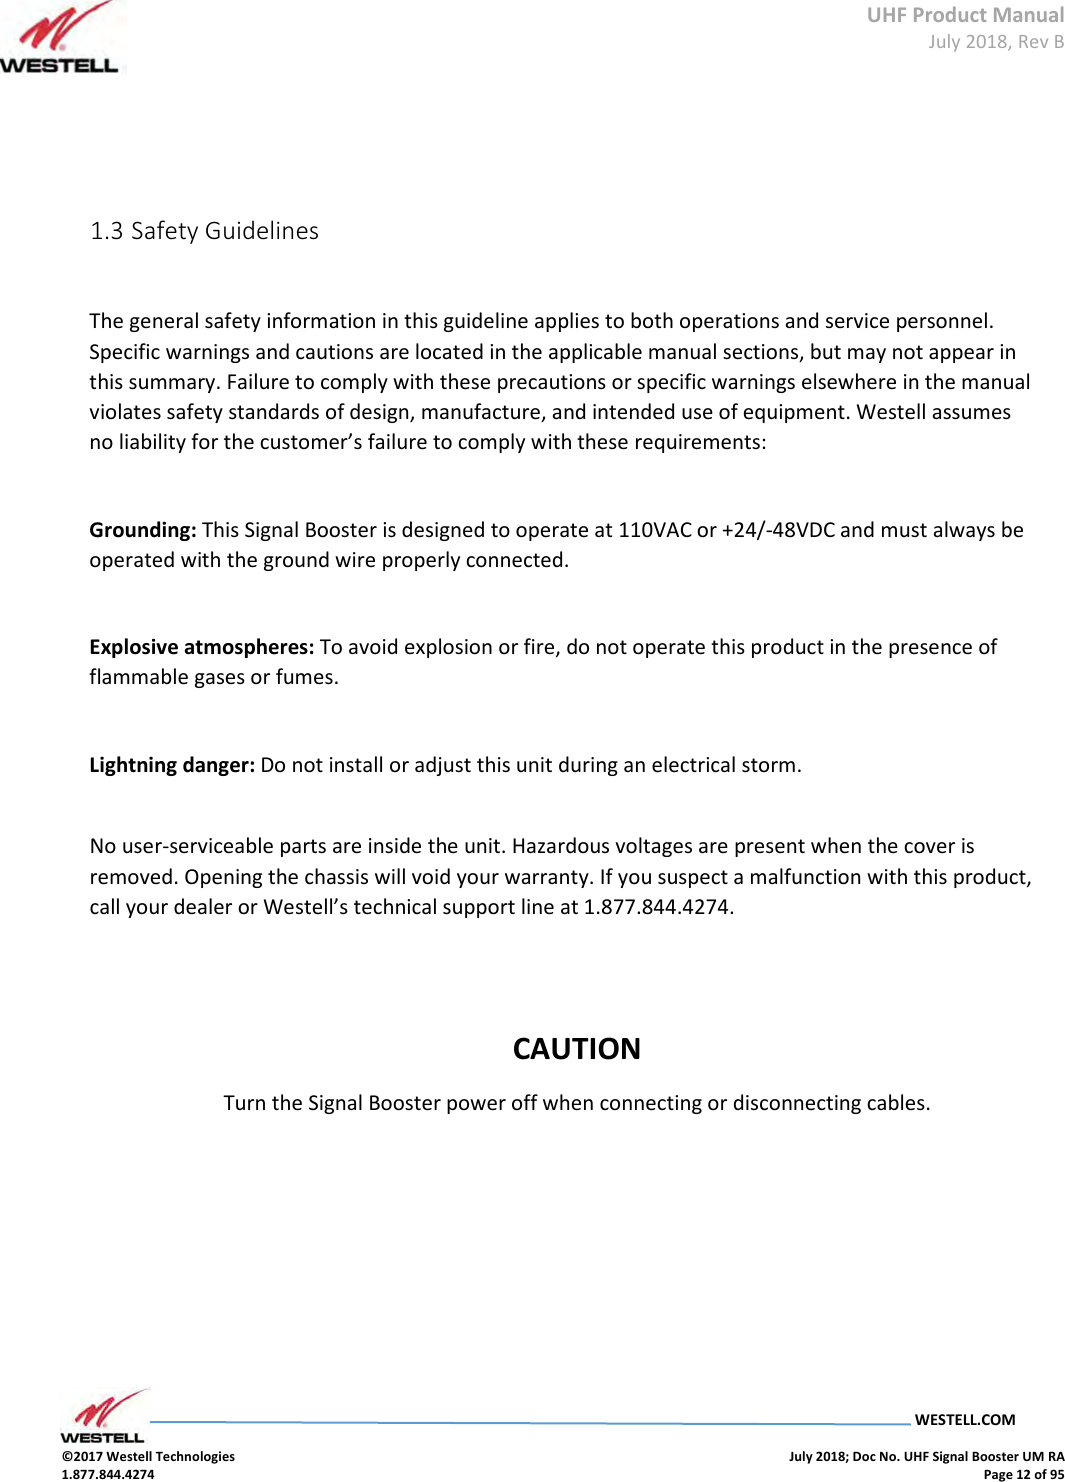 UHF Product Manual July 2018, Rev B   WESTELL.COM  ©2017 Westell Technologies    July 2018; Doc No. UHF Signal Booster UM RA 1.877.844.4274    Page 12 of 95         1.3 Safety Guidelines    The general safety information in this guideline applies to both operations and service personnel. Specific warnings and cautions are located in the applicable manual sections, but may not appear in this summary. Failure to comply with these precautions or specific warnings elsewhere in the manual violates safety standards of design, manufacture, and intended use of equipment. Westell assumes no liability for the customer’s failure to comply with these requirements:    Grounding: This Signal Booster is designed to operate at 110VAC or +24/-48VDC and must always be operated with the ground wire properly connected.     Explosive atmospheres: To avoid explosion or fire, do not operate this product in the presence of flammable gases or fumes.    Lightning danger: Do not install or adjust this unit during an electrical storm.     No user-serviceable parts are inside the unit. Hazardous voltages are present when the cover is removed. Opening the chassis will void your warranty. If you suspect a malfunction with this product, call your dealer or Westell’s technical support line at 1.877.844.4274.       CAUTION Turn the Signal Booster power off when connecting or disconnecting cables.               